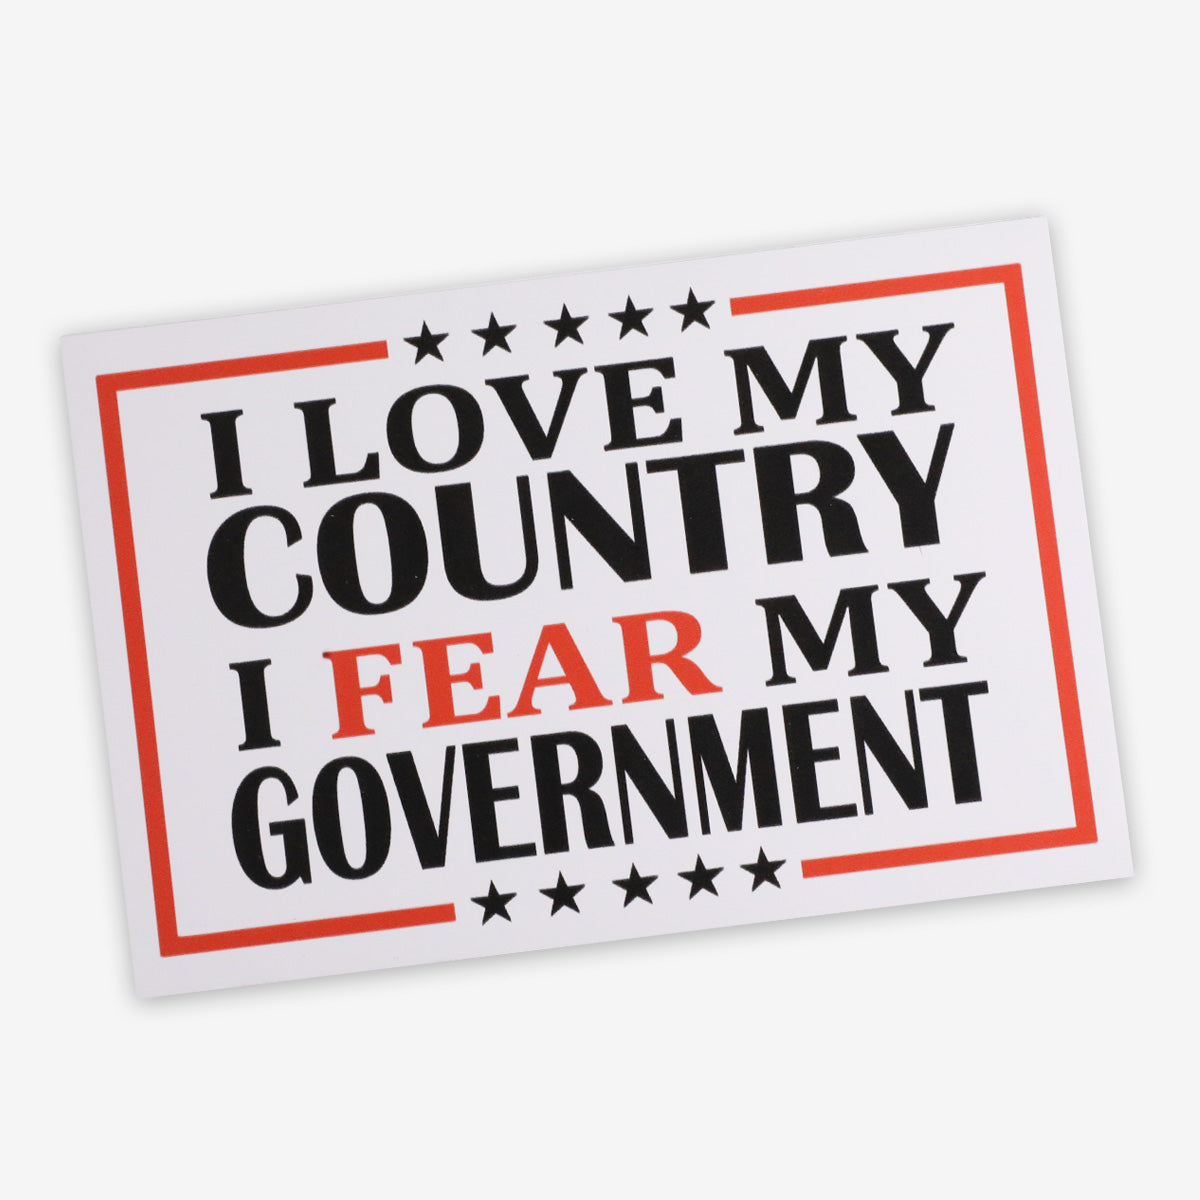 Love My Country Fear My Government Sticker